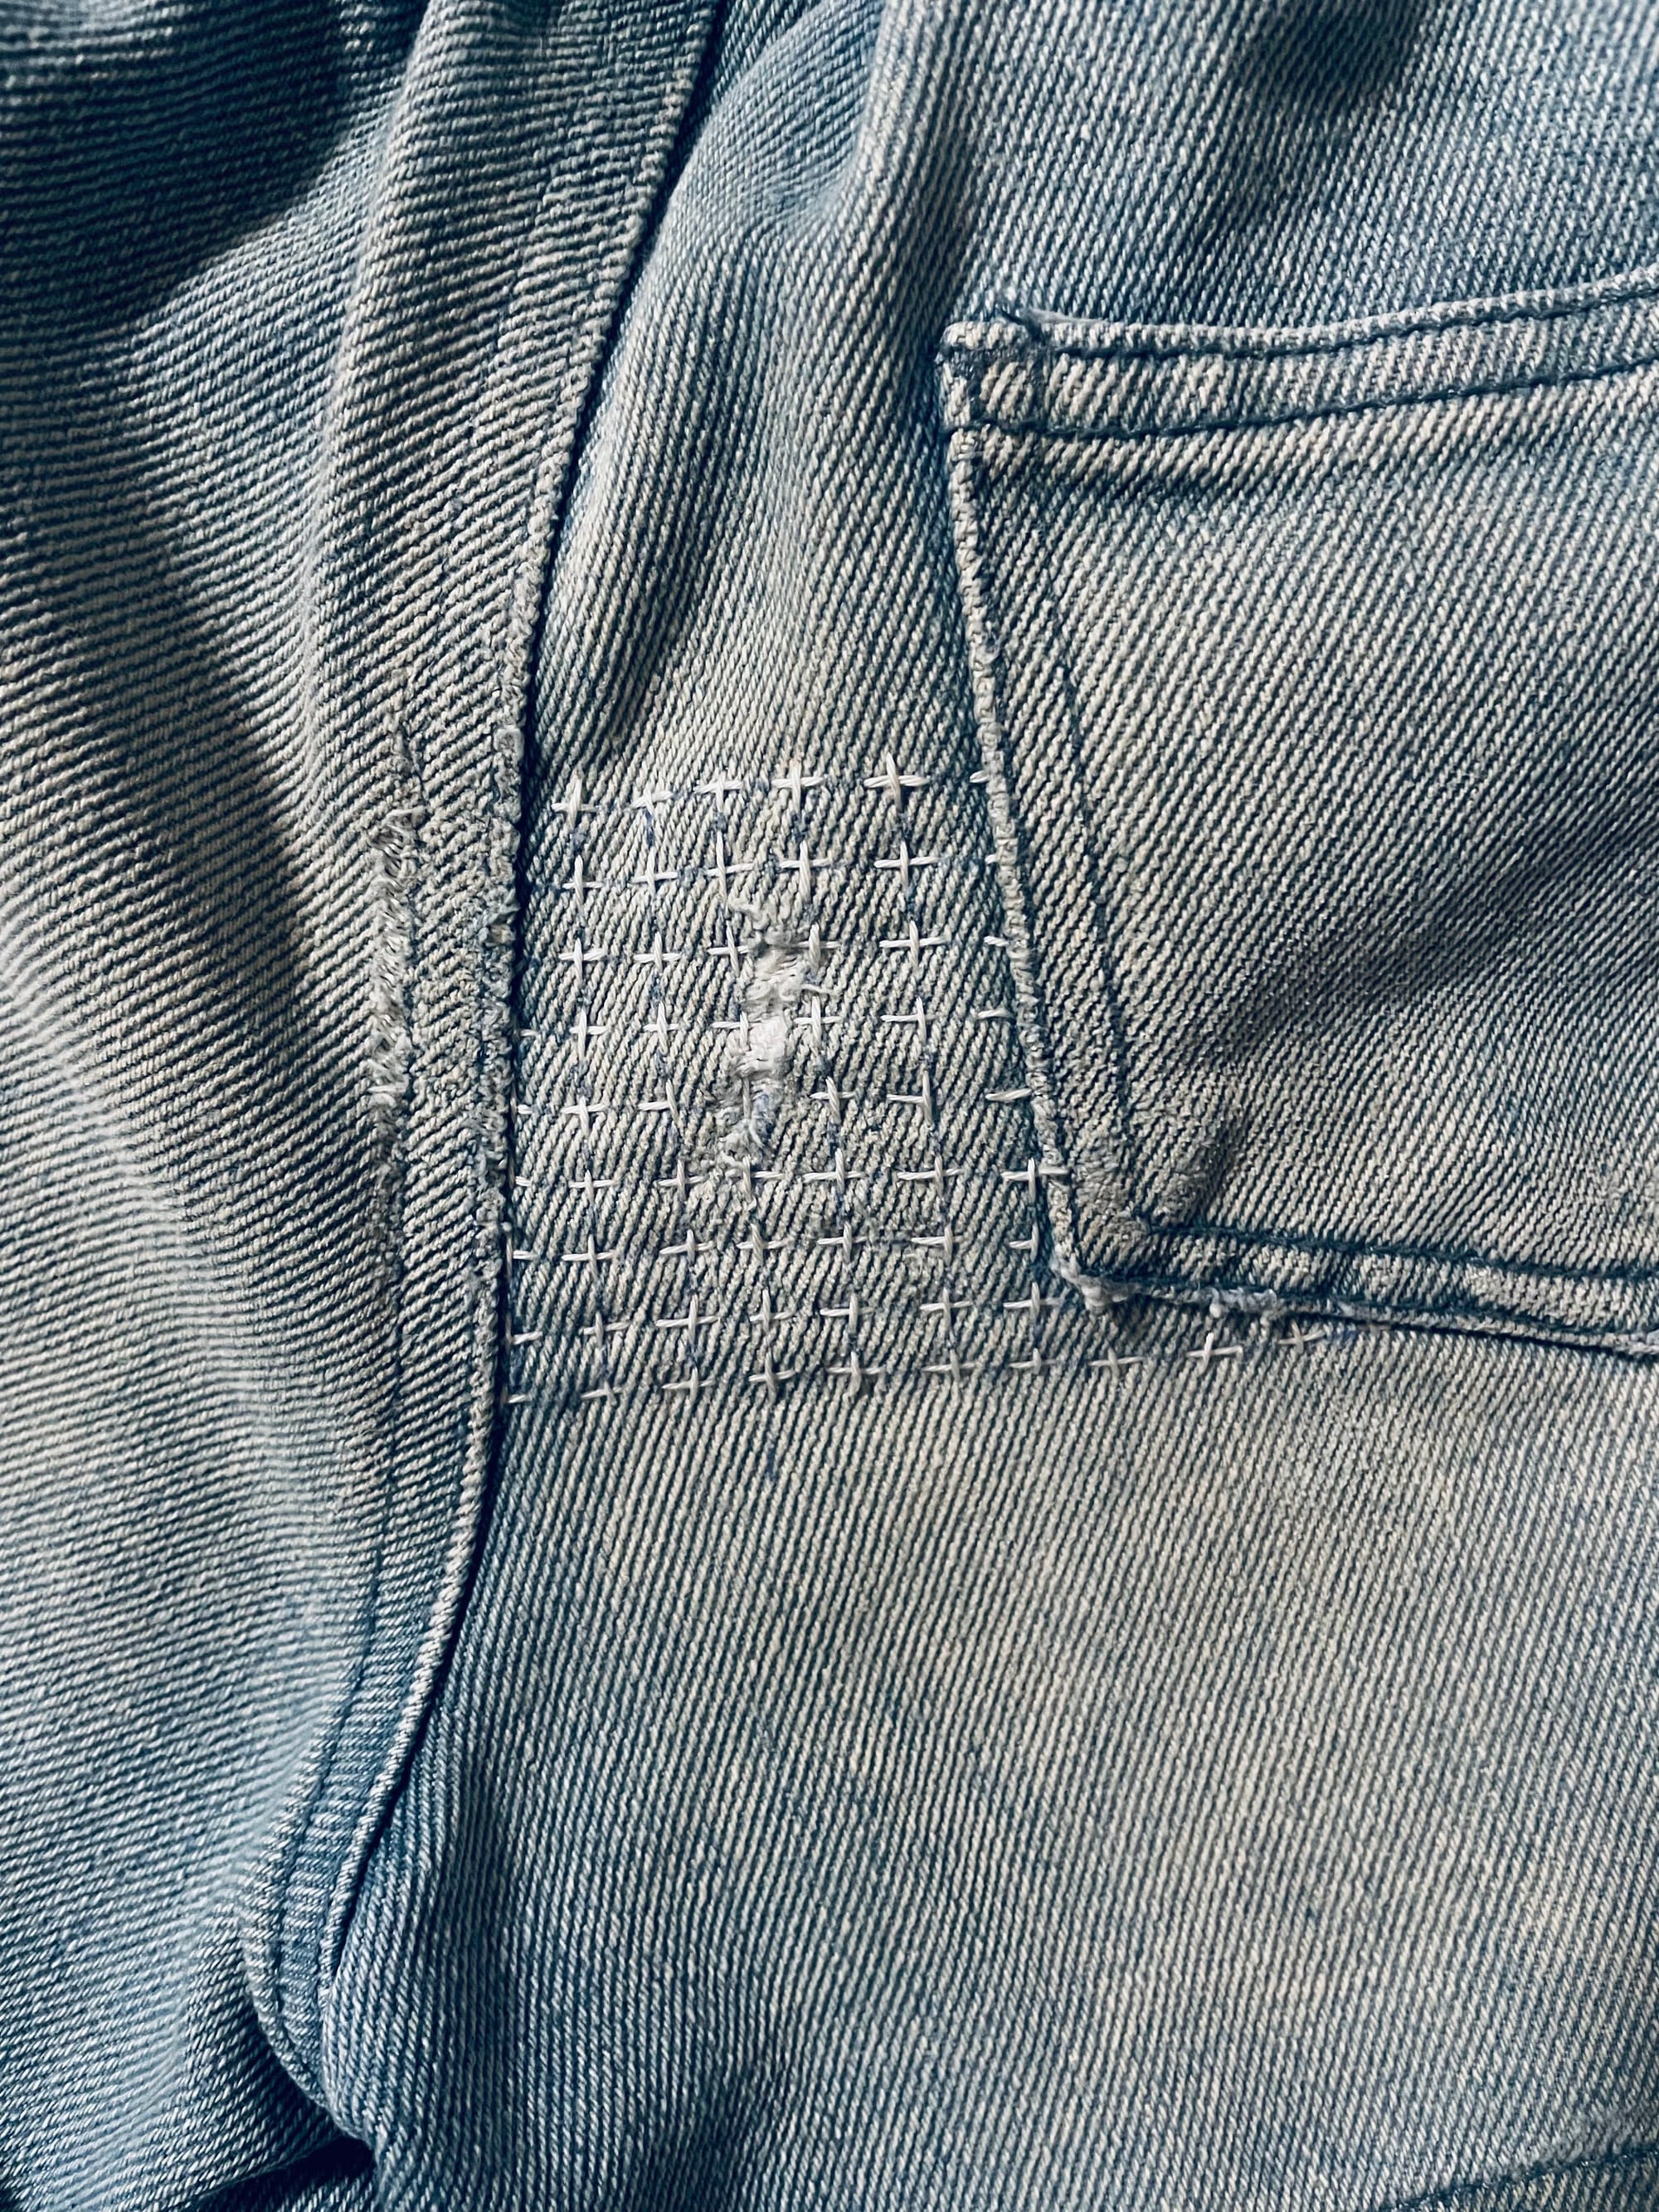 Light blue denims are patched with sashiko done in white thread